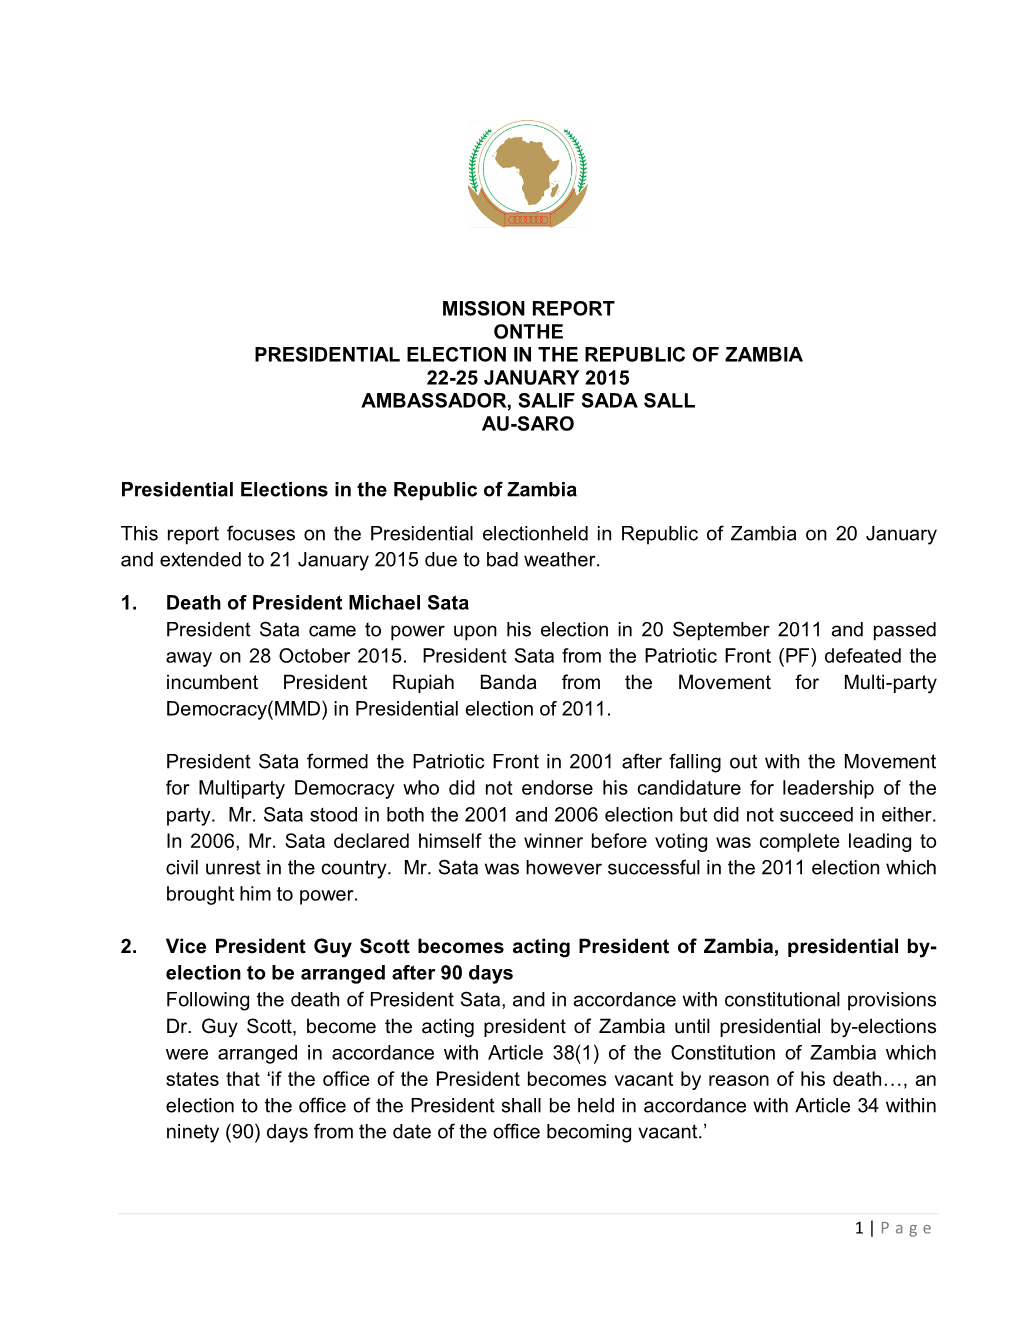 Mission Report Onthe Presidential Election in the Republic of Zambia 22-25 January 2015 Ambassador, Salif Sada Sall Au-Saro